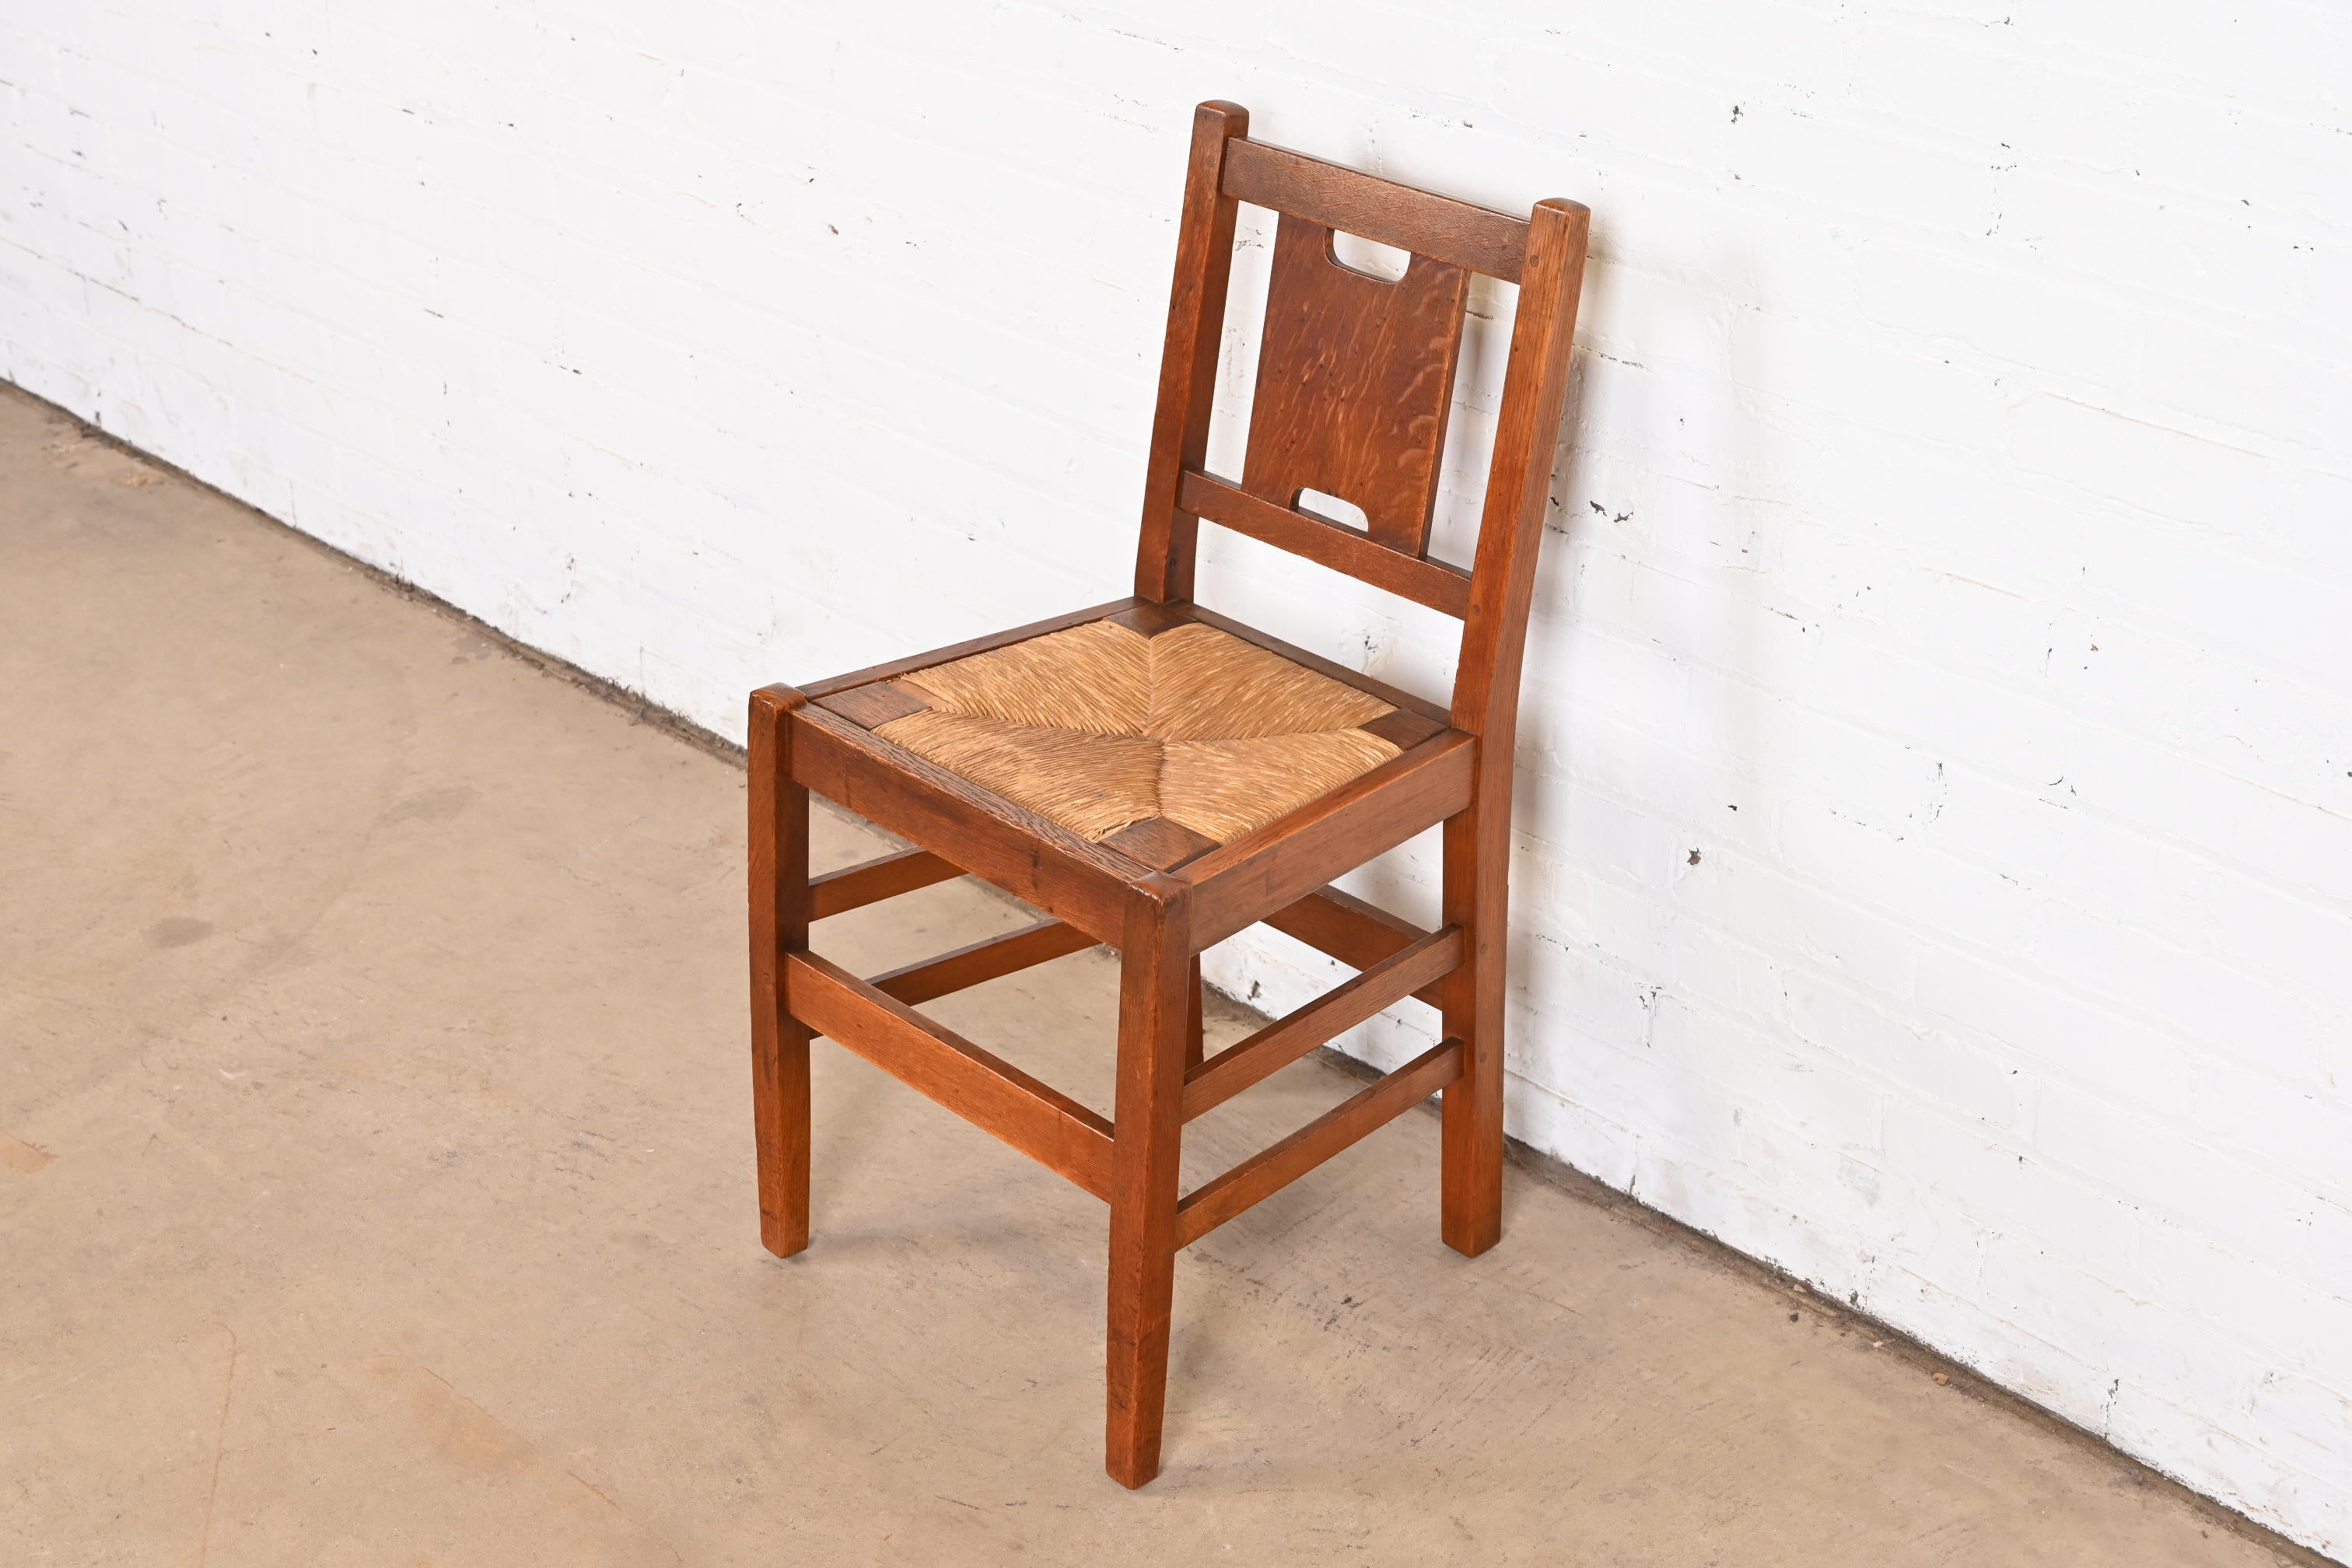 A rare and exceptional antique Mission or Arts & Crafts H-back desk chair or side chair

By Gustav Stickley

USA, Early 20th Century

Solid quarter sawn oak, with original rush seat.

Measures: 16.75